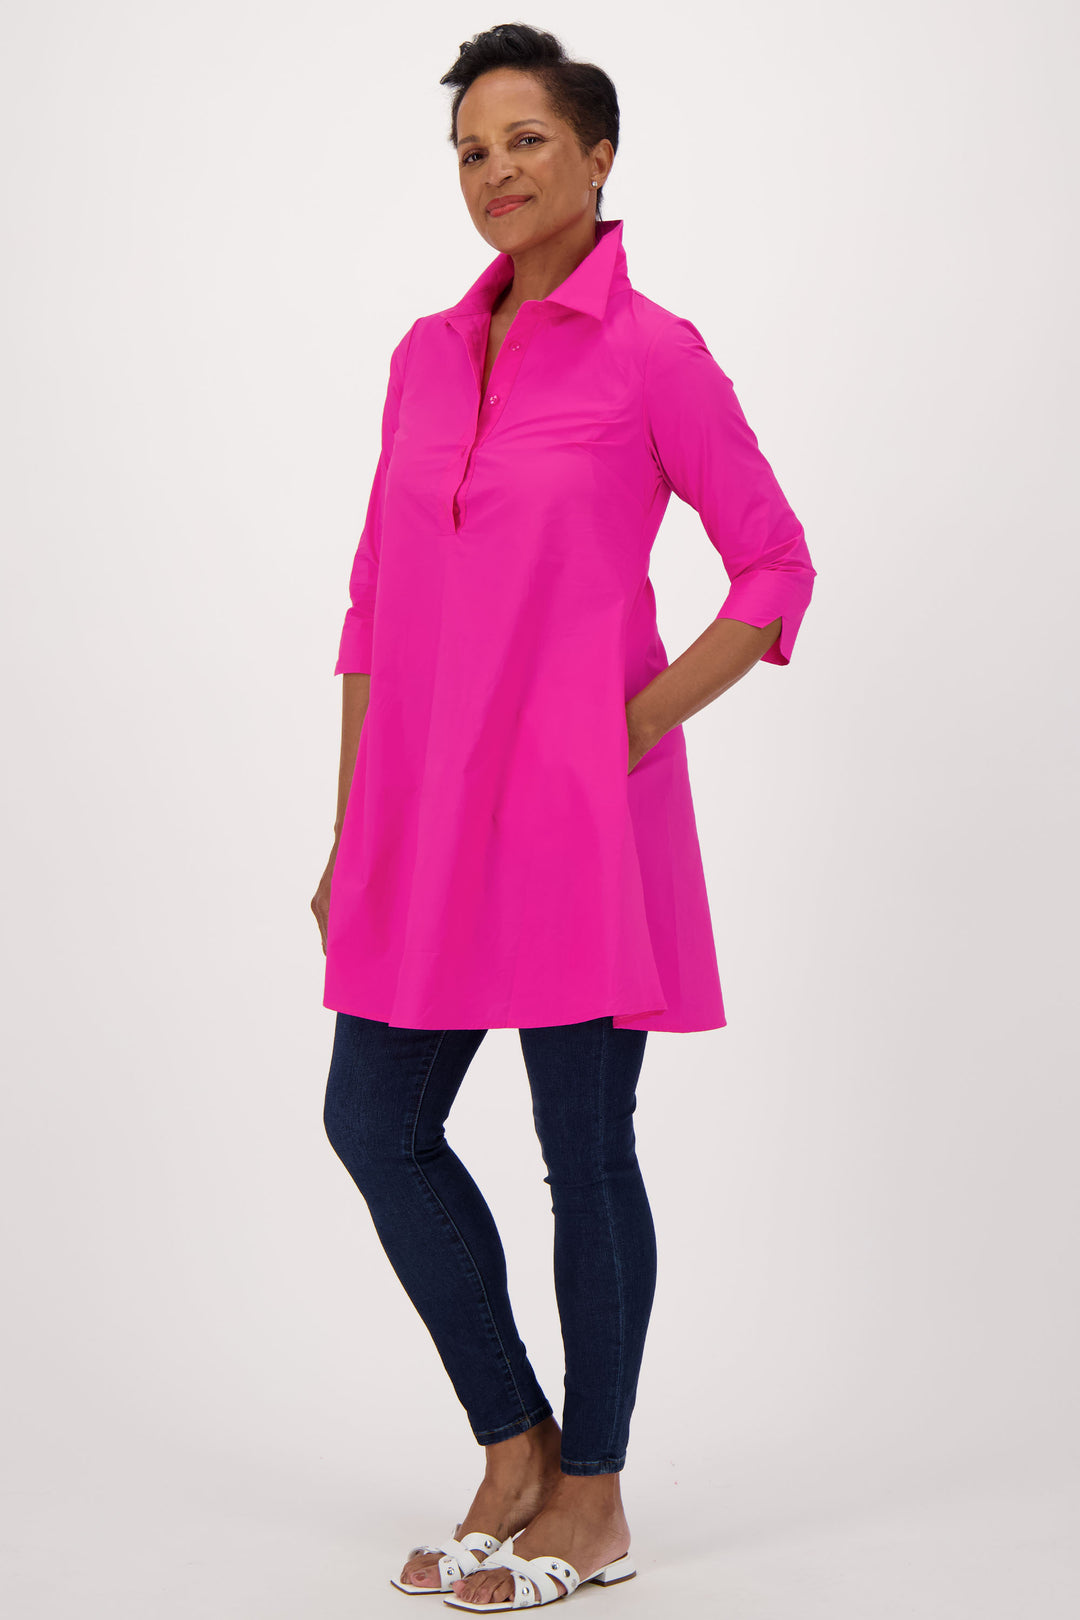 Spanner Summer 2024 This elegant dress features a classic collar and quarter front buttons, perfect for a sophisticated and exclusive look. The 3/4 length sleeves and great flow make it a versatile piece, ideal for pairing with slim fit jeans or wearing on its own as a short dress. 